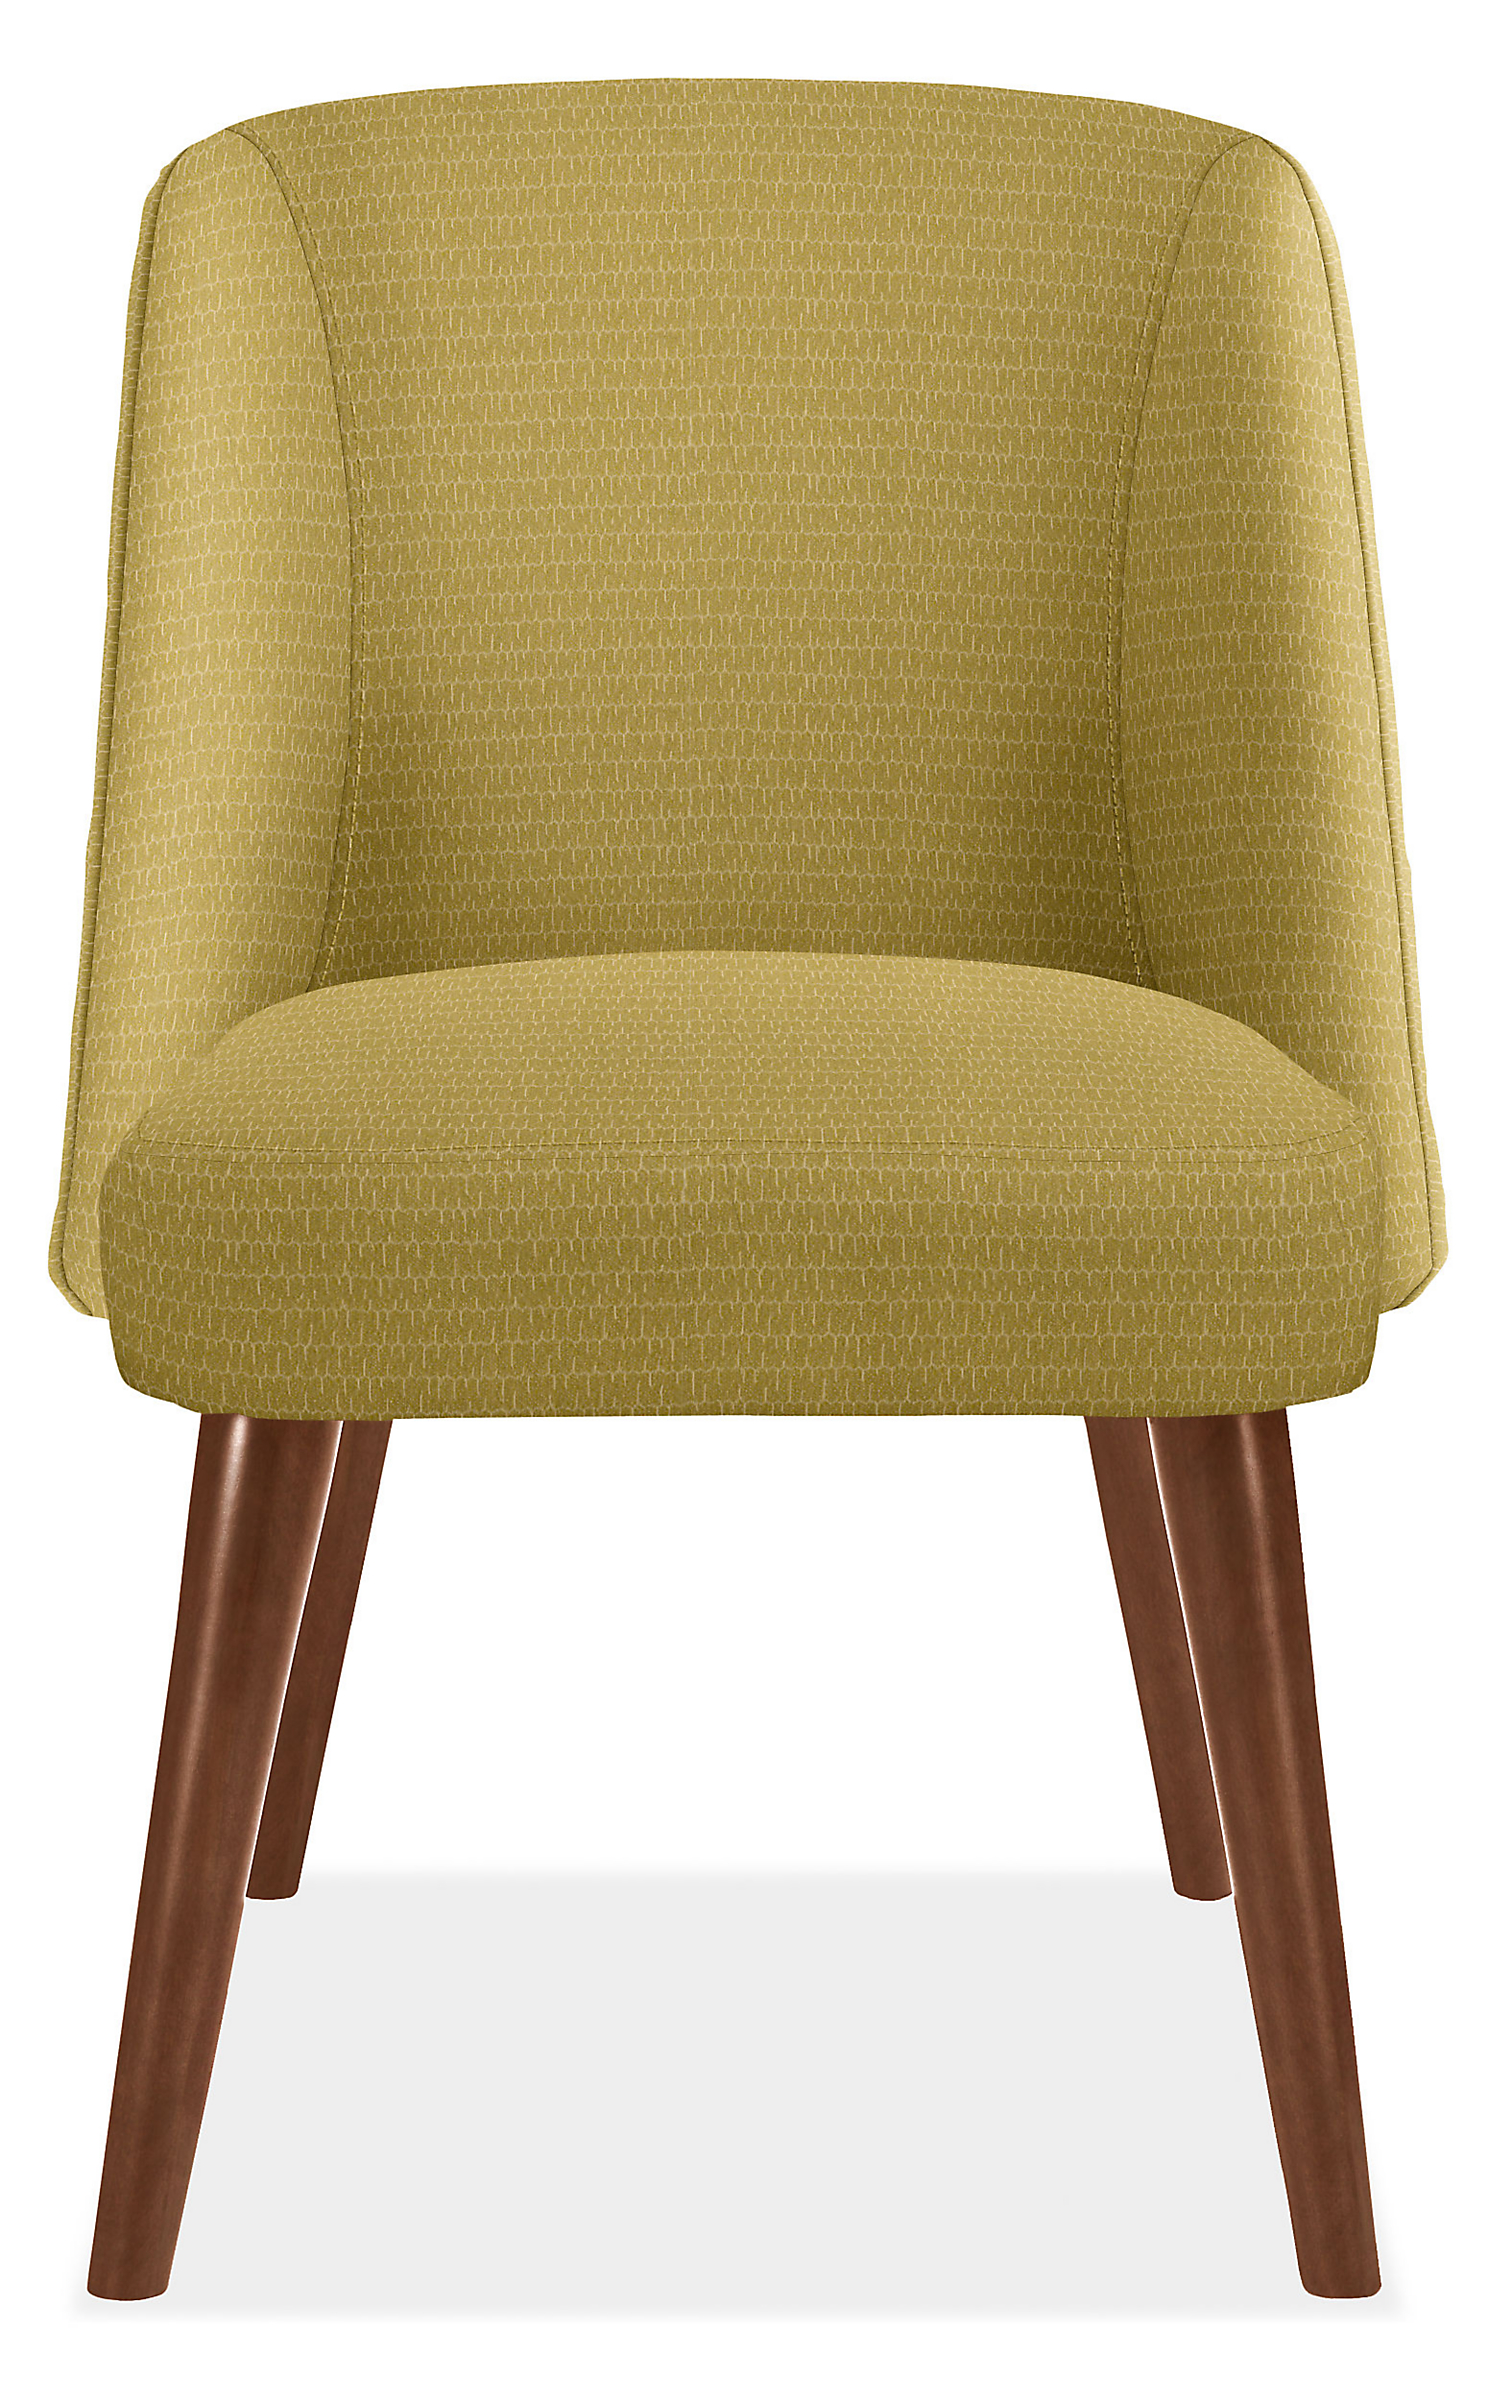 Cora Side Chair in Holtz Moss with Mocha Legs